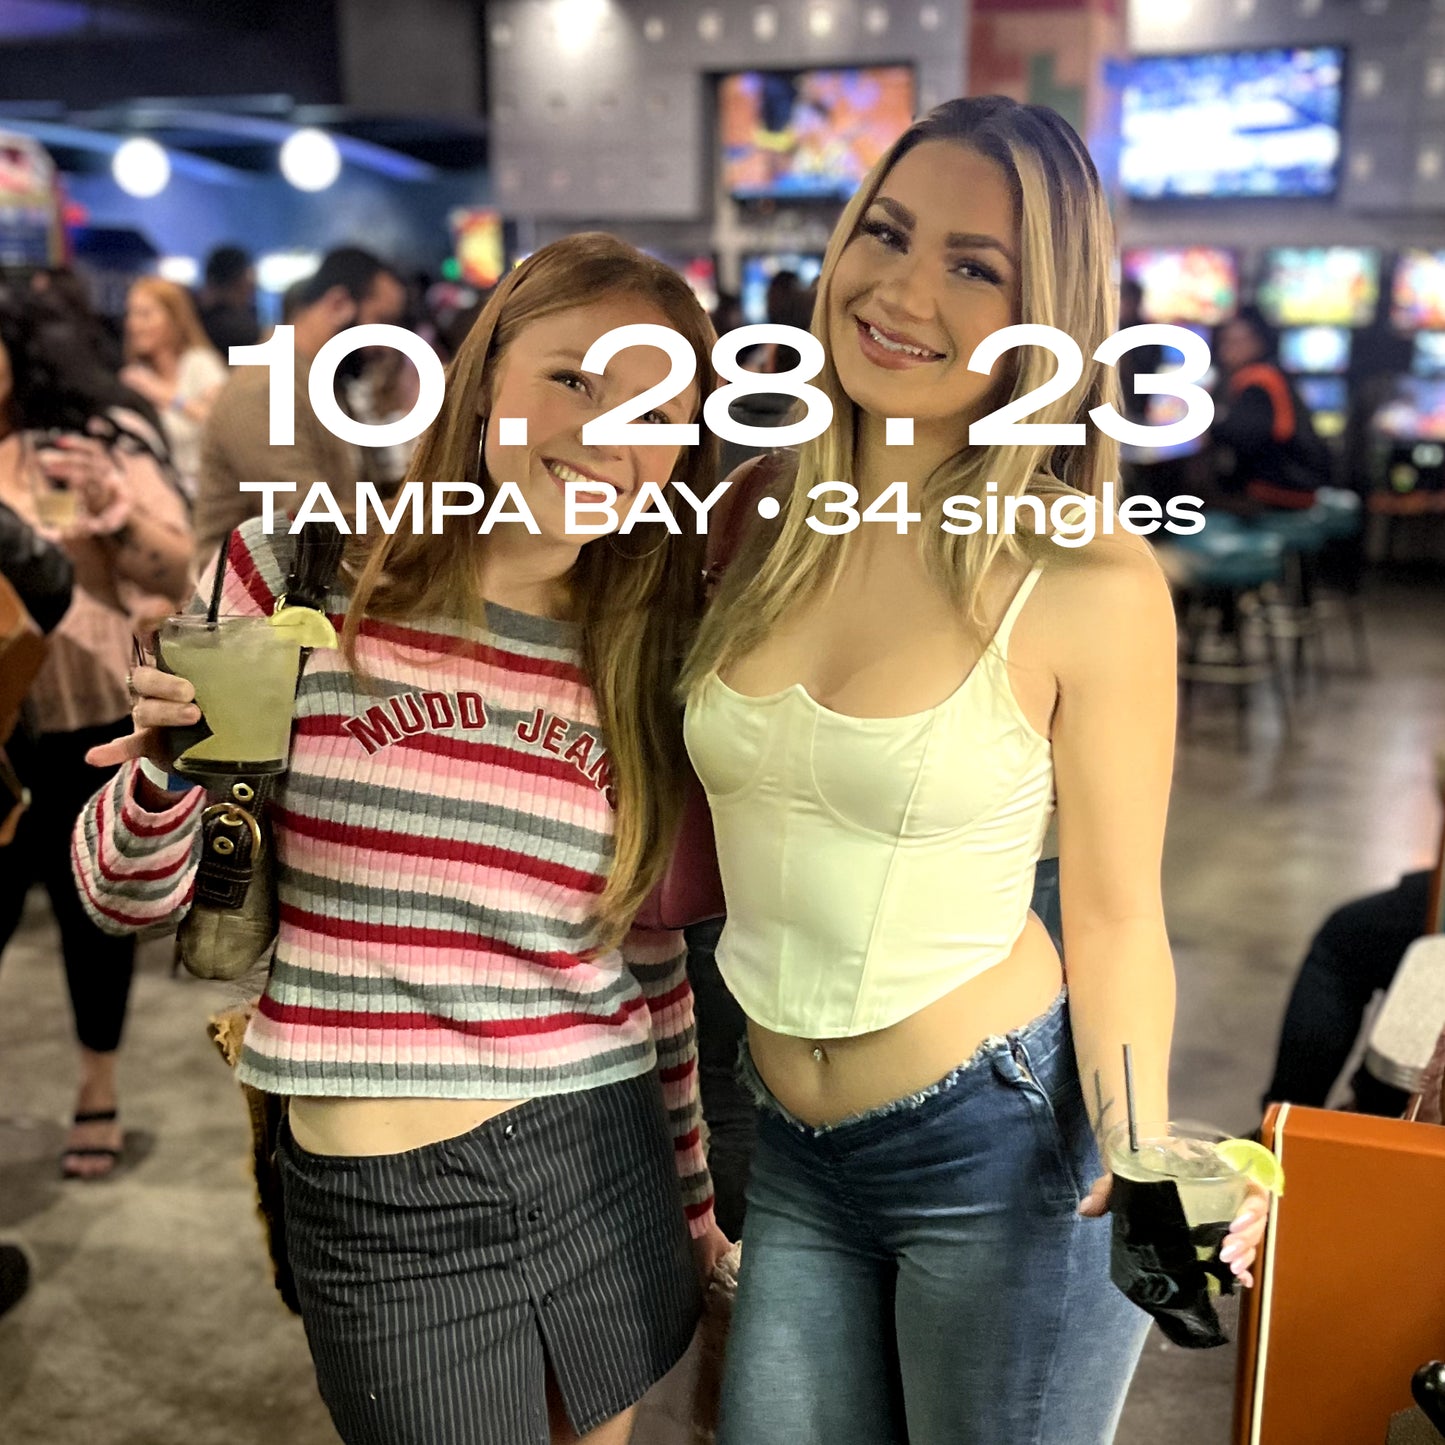 TAMPA BAY: Singles Happy Hour